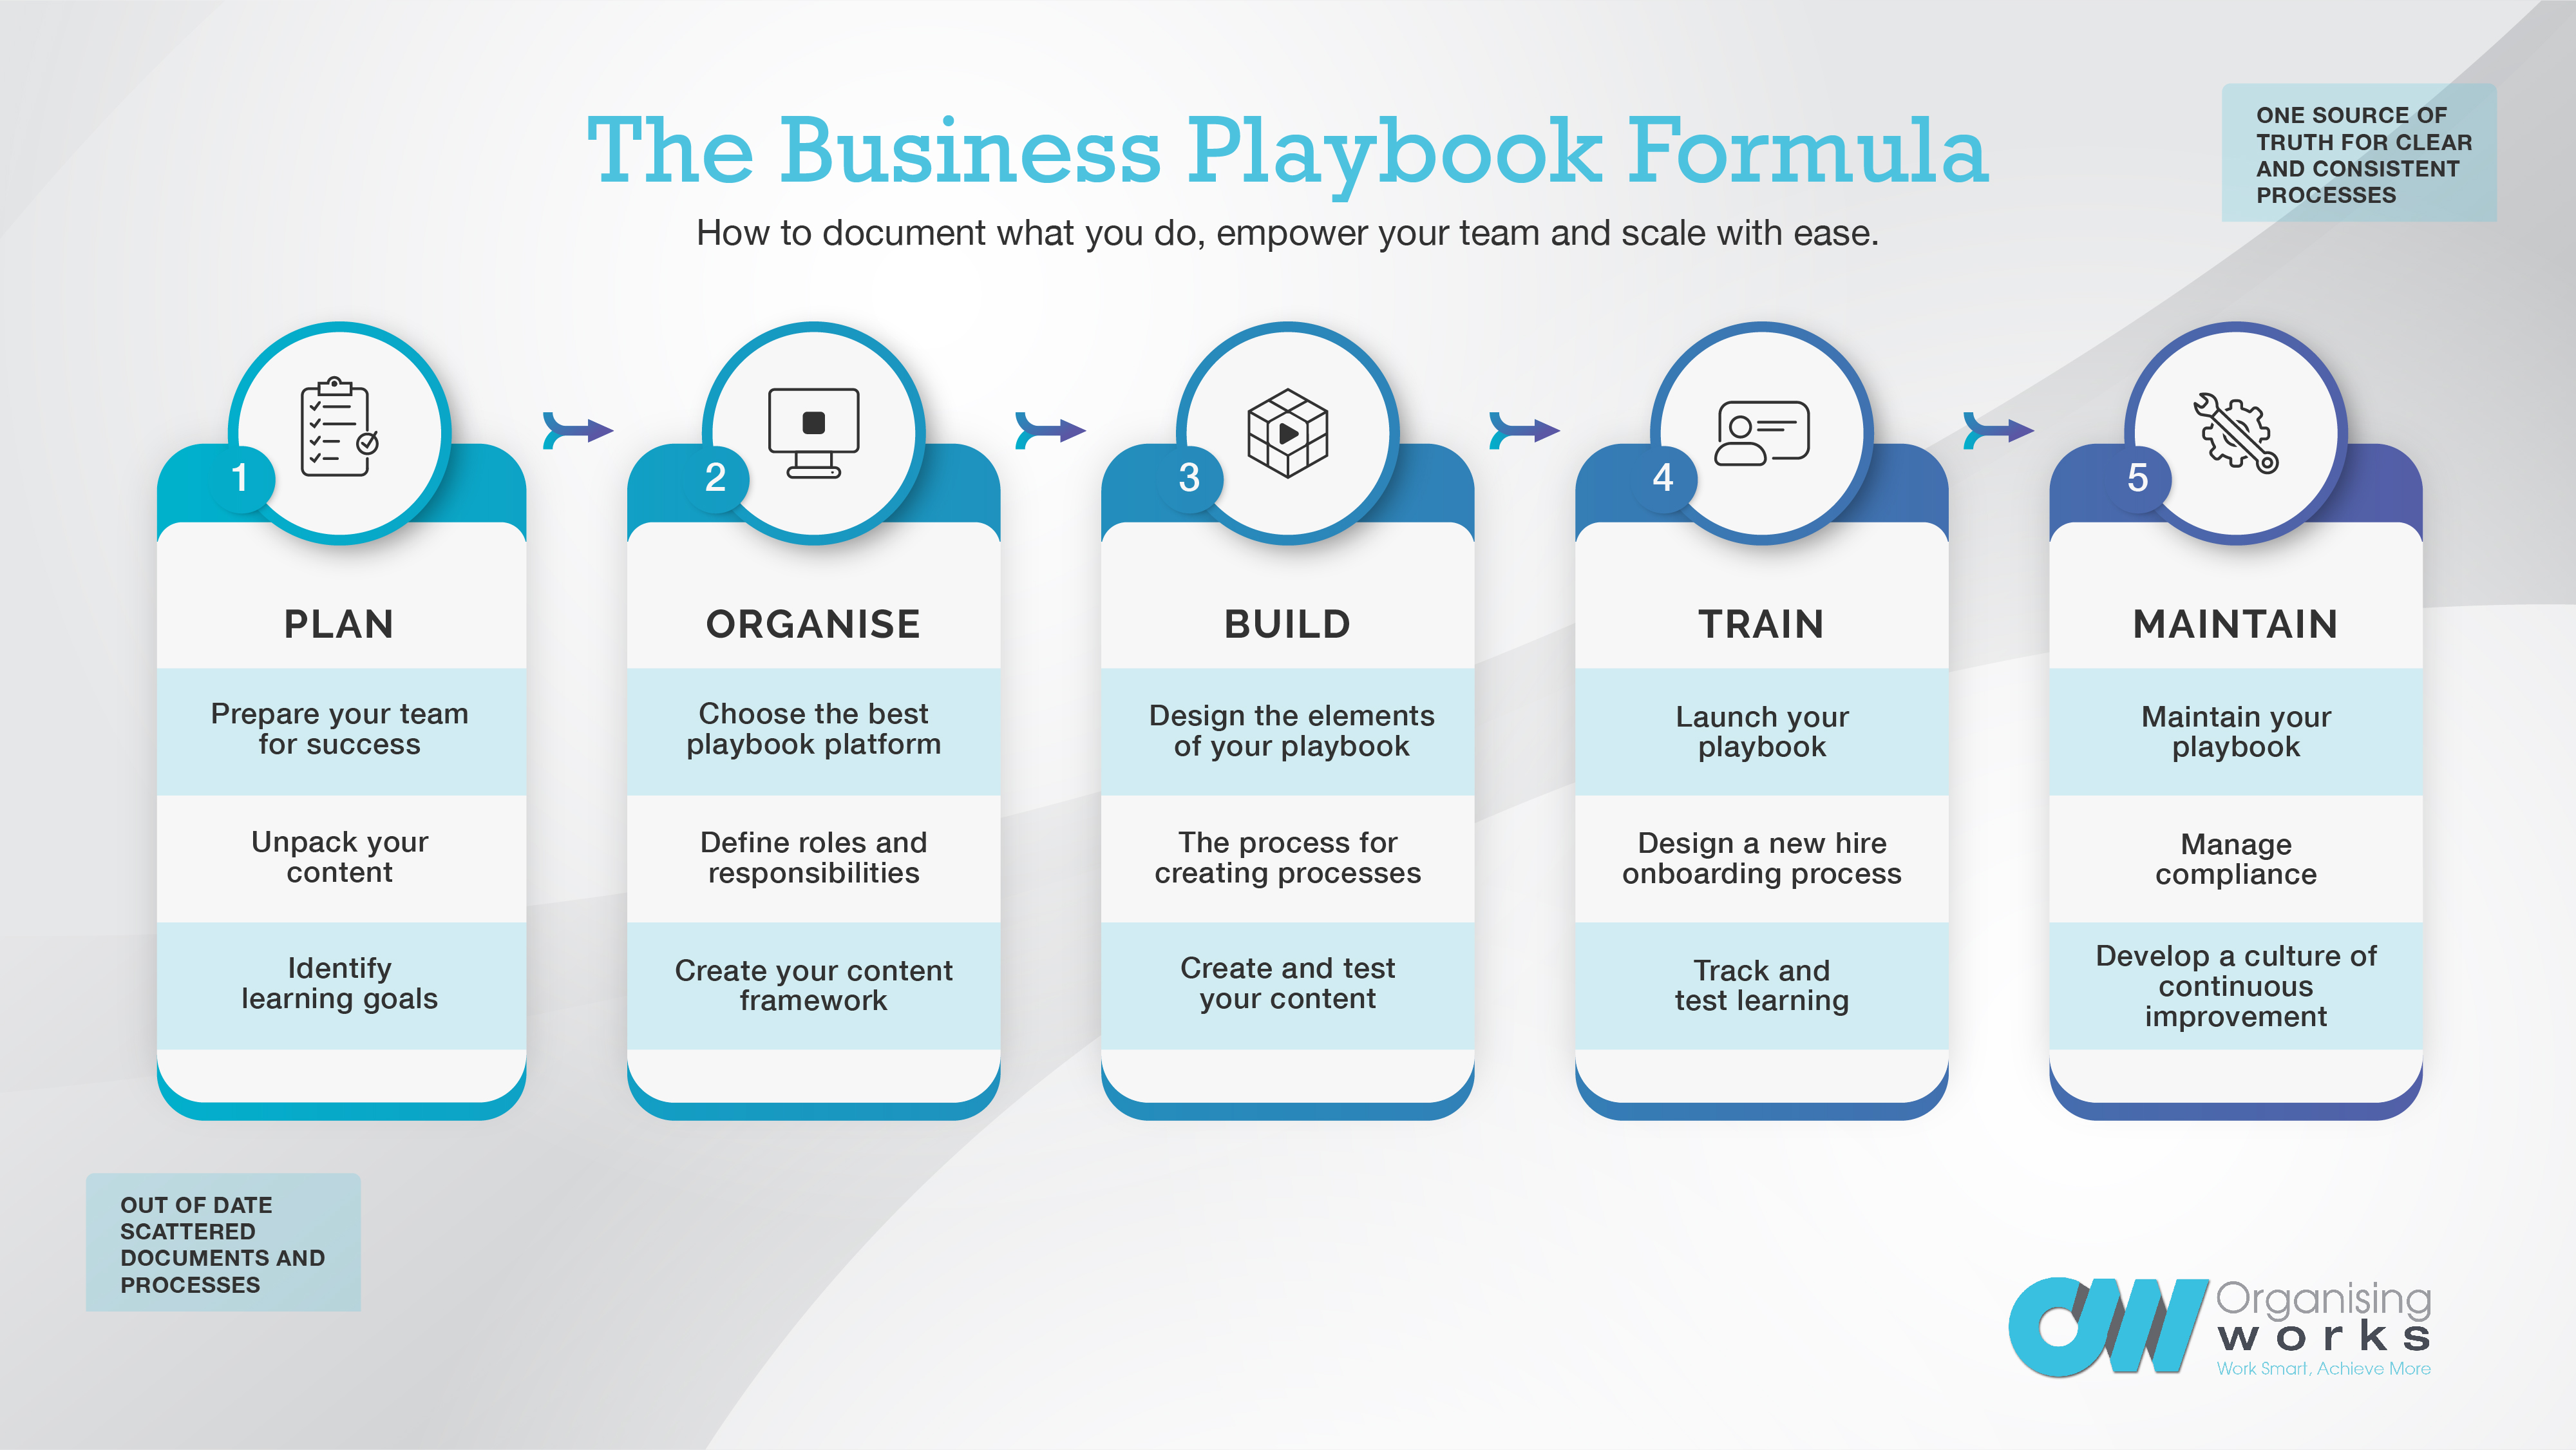 The Business Playbook Formula